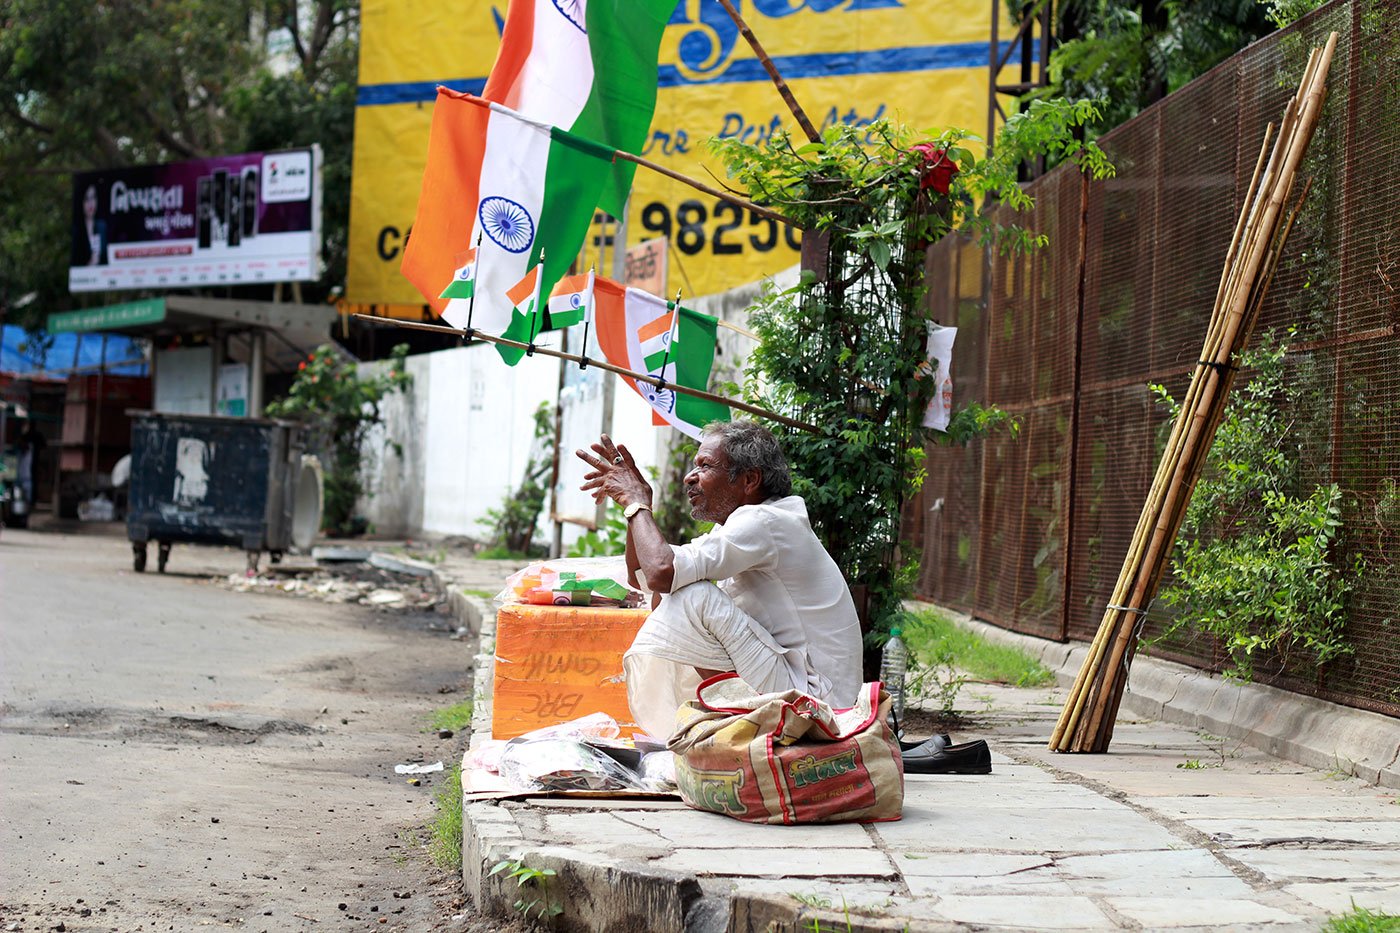 Chiranjilal Bagariya, in his 60s, is the oldest flag-seller on these streets